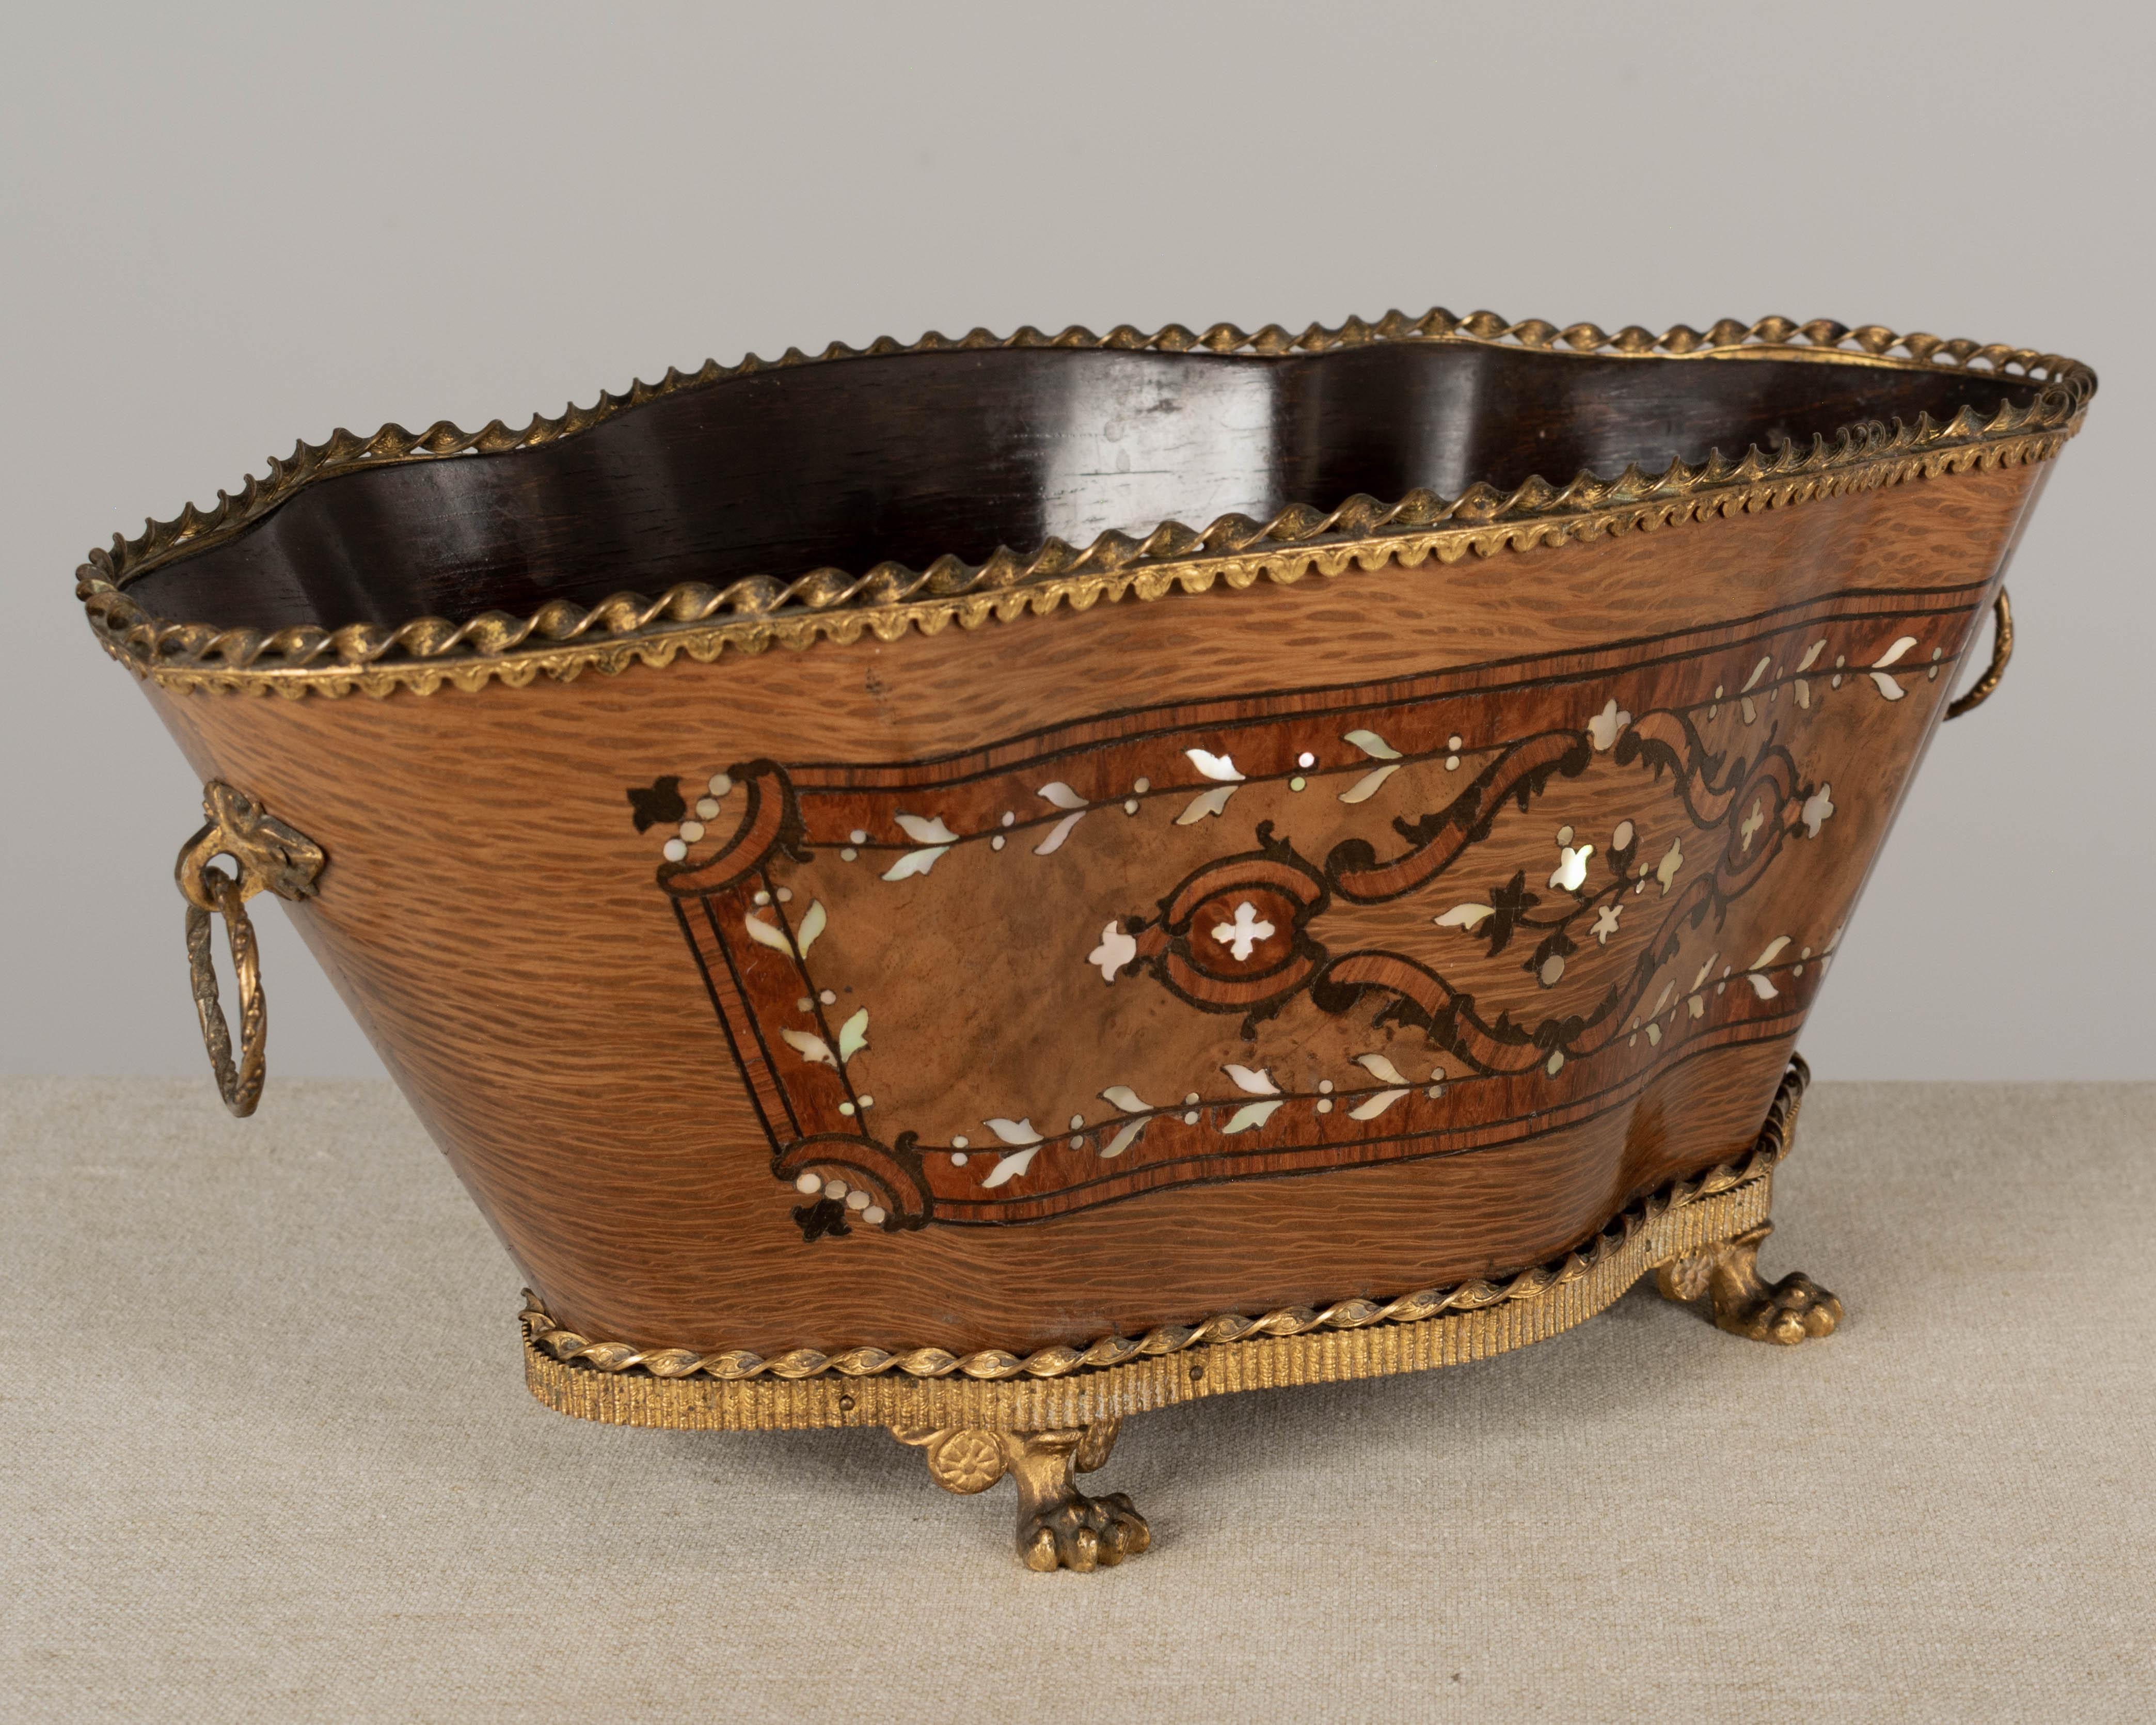 An early 20th century Napoleon III style oval jardinière, or planter, made of rosewood with fine marquetry inlay of various woods and mother of pearl. French polish finish. Bronze-mounted with rig handles and decorative cast lion paw feet. A